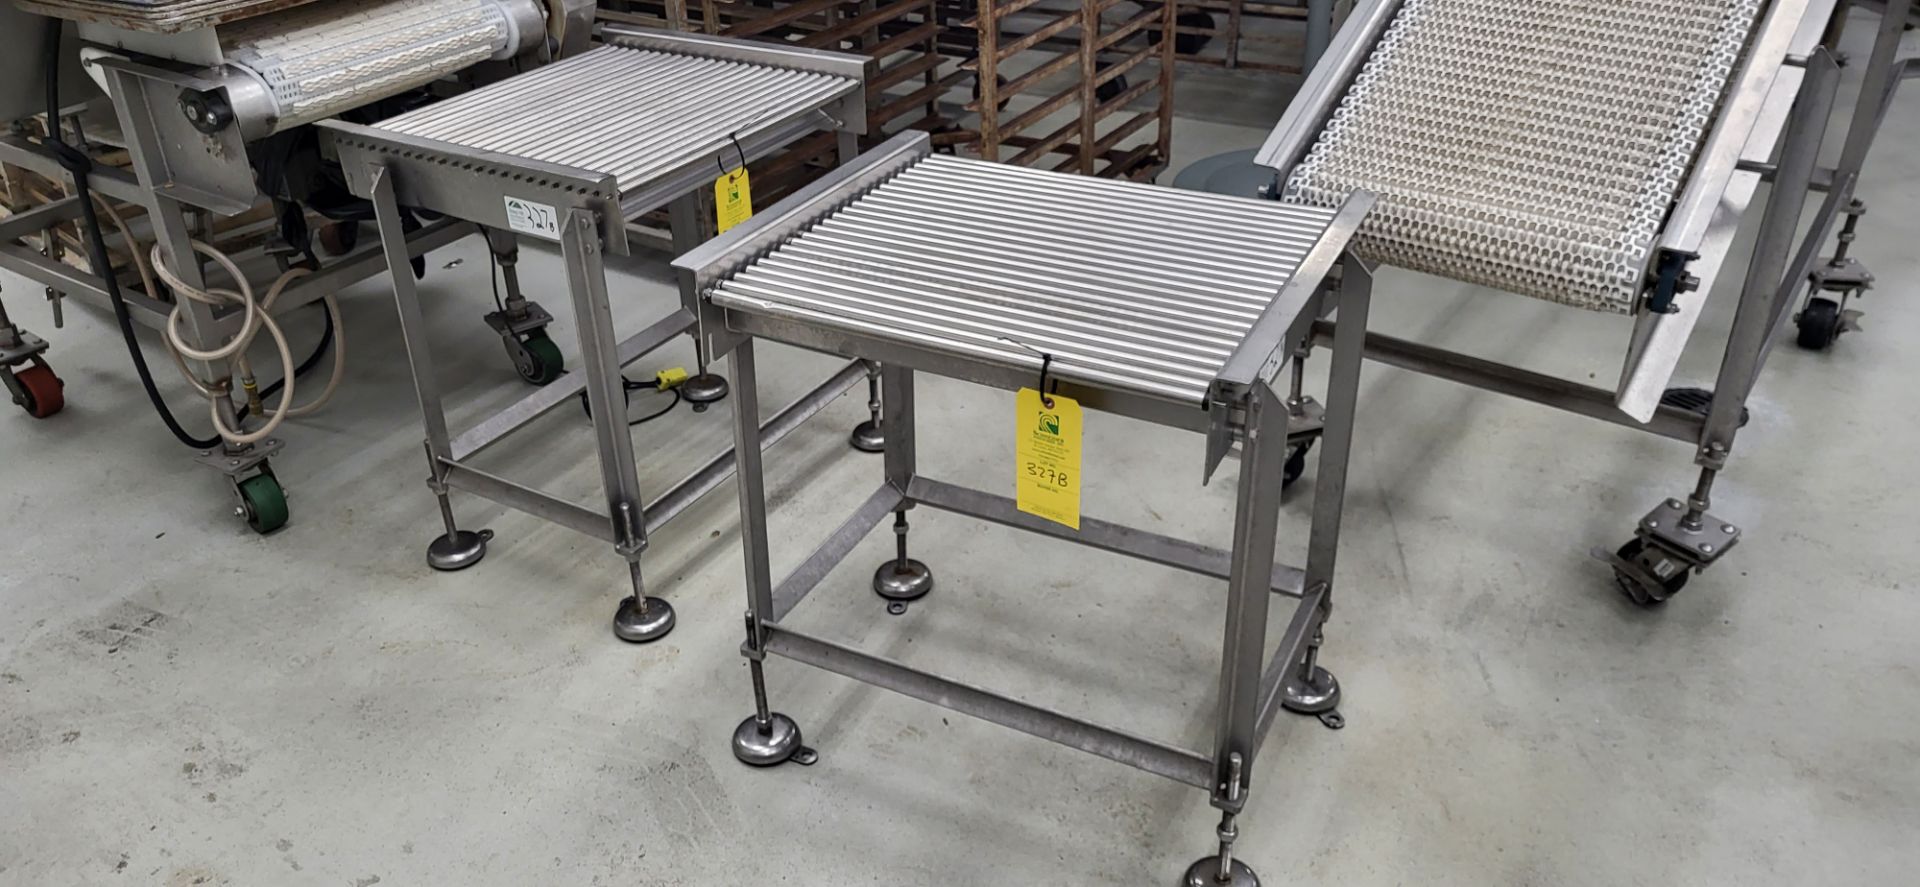 Lot of 2 Box Case Roller Conveyors